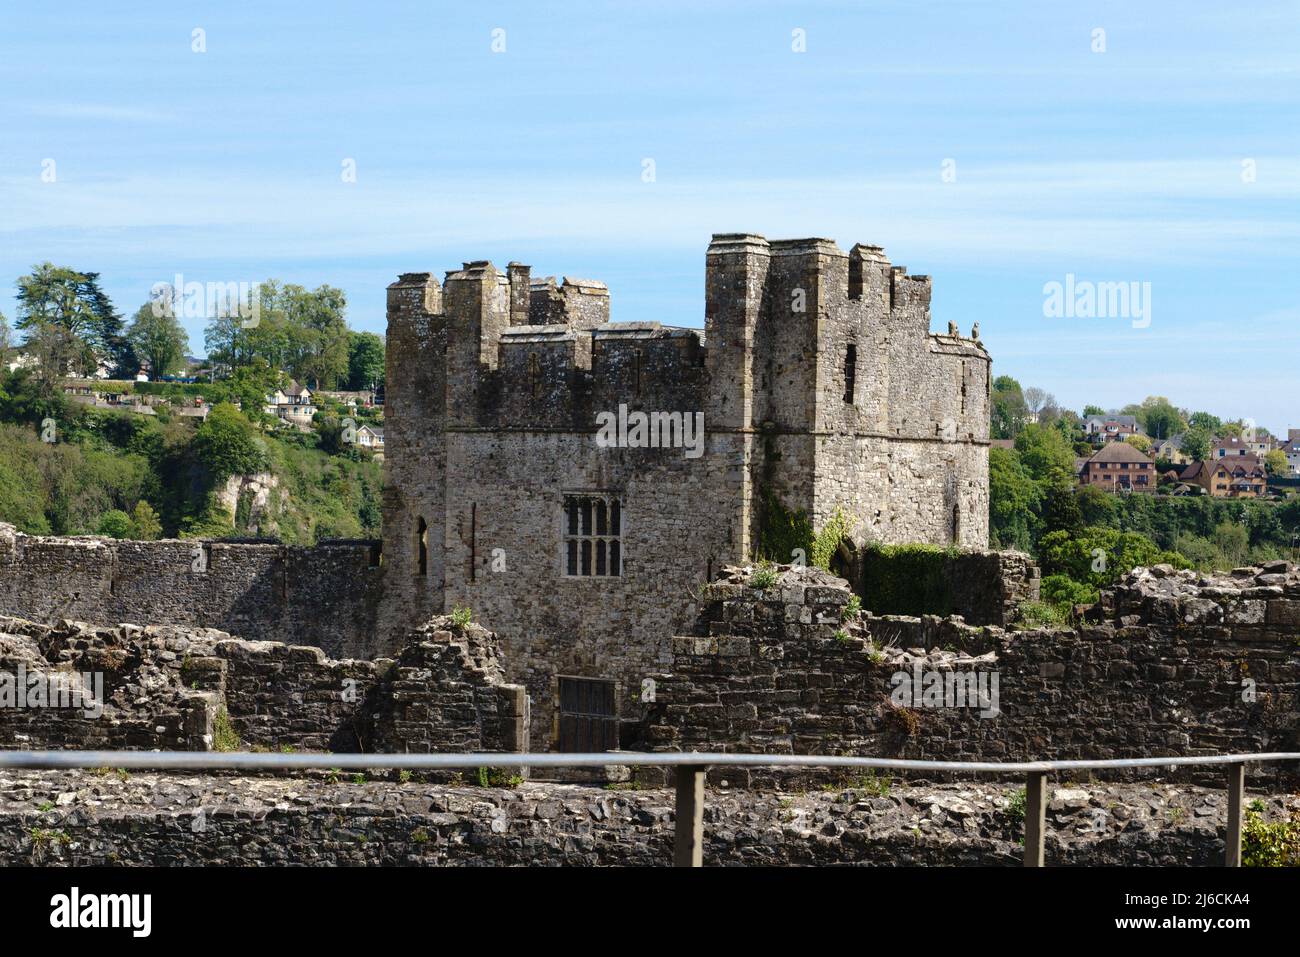 View of Marshall's Tower from the Upper bailey Wall, Chepstow Castle, Monmouthshire, South Wales. Stock Photo